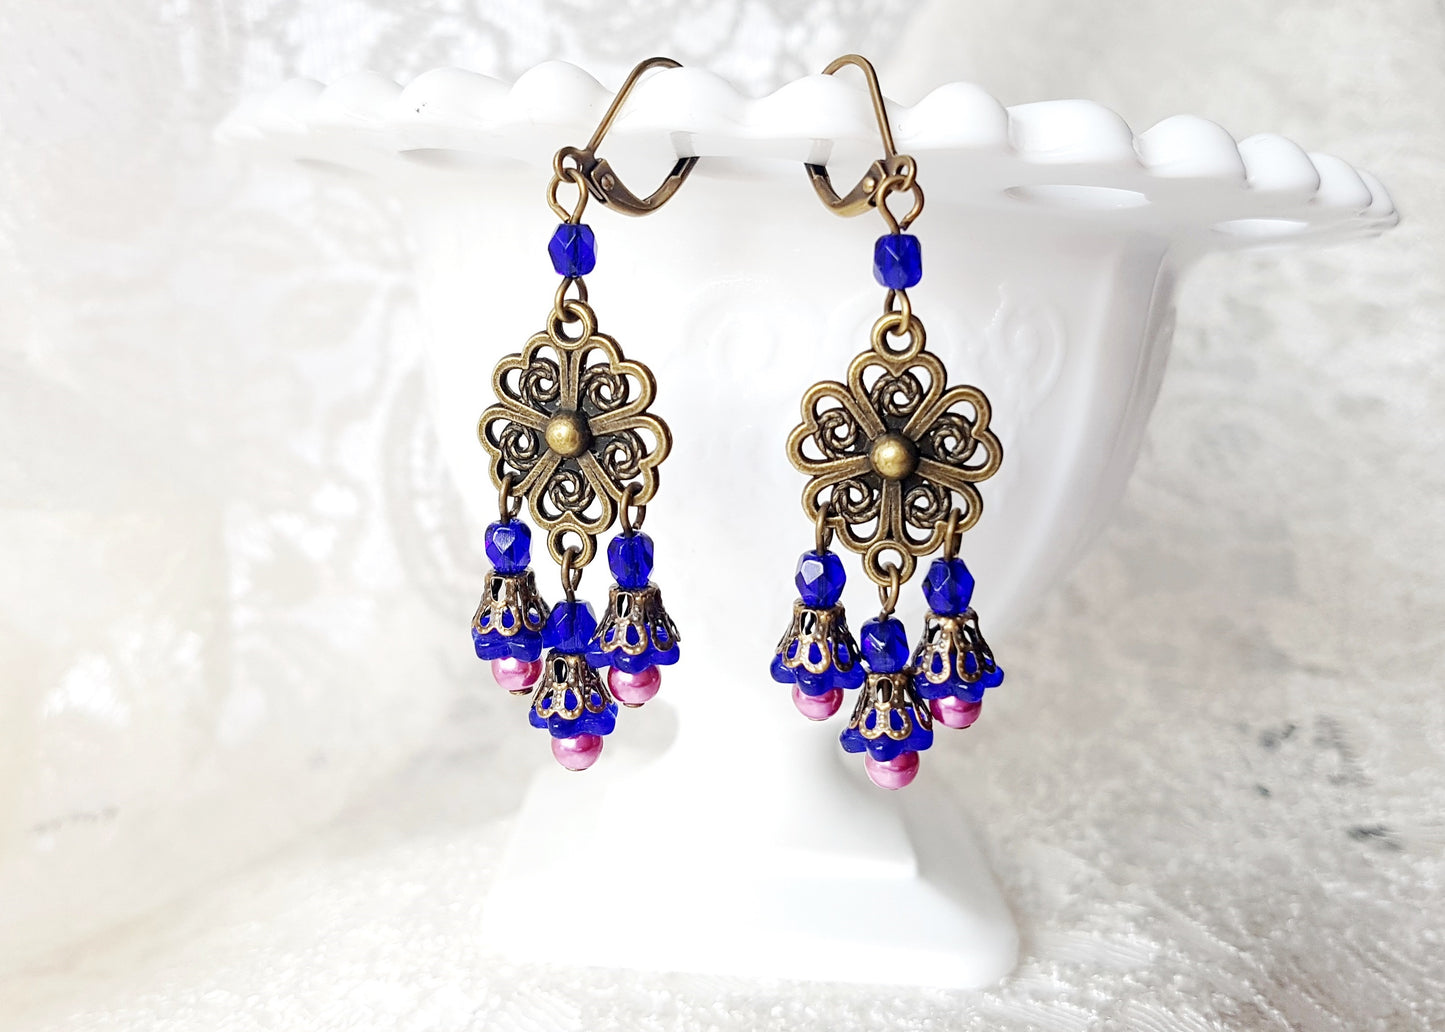 Vintage Blue Flower, Pink Pearl Long Chandelier Earrings, Deep Blue / Cobalt Blue/Sapphire Blue with Fuchsia Pink Pear Accents and Antique Brass/Bronze metal.